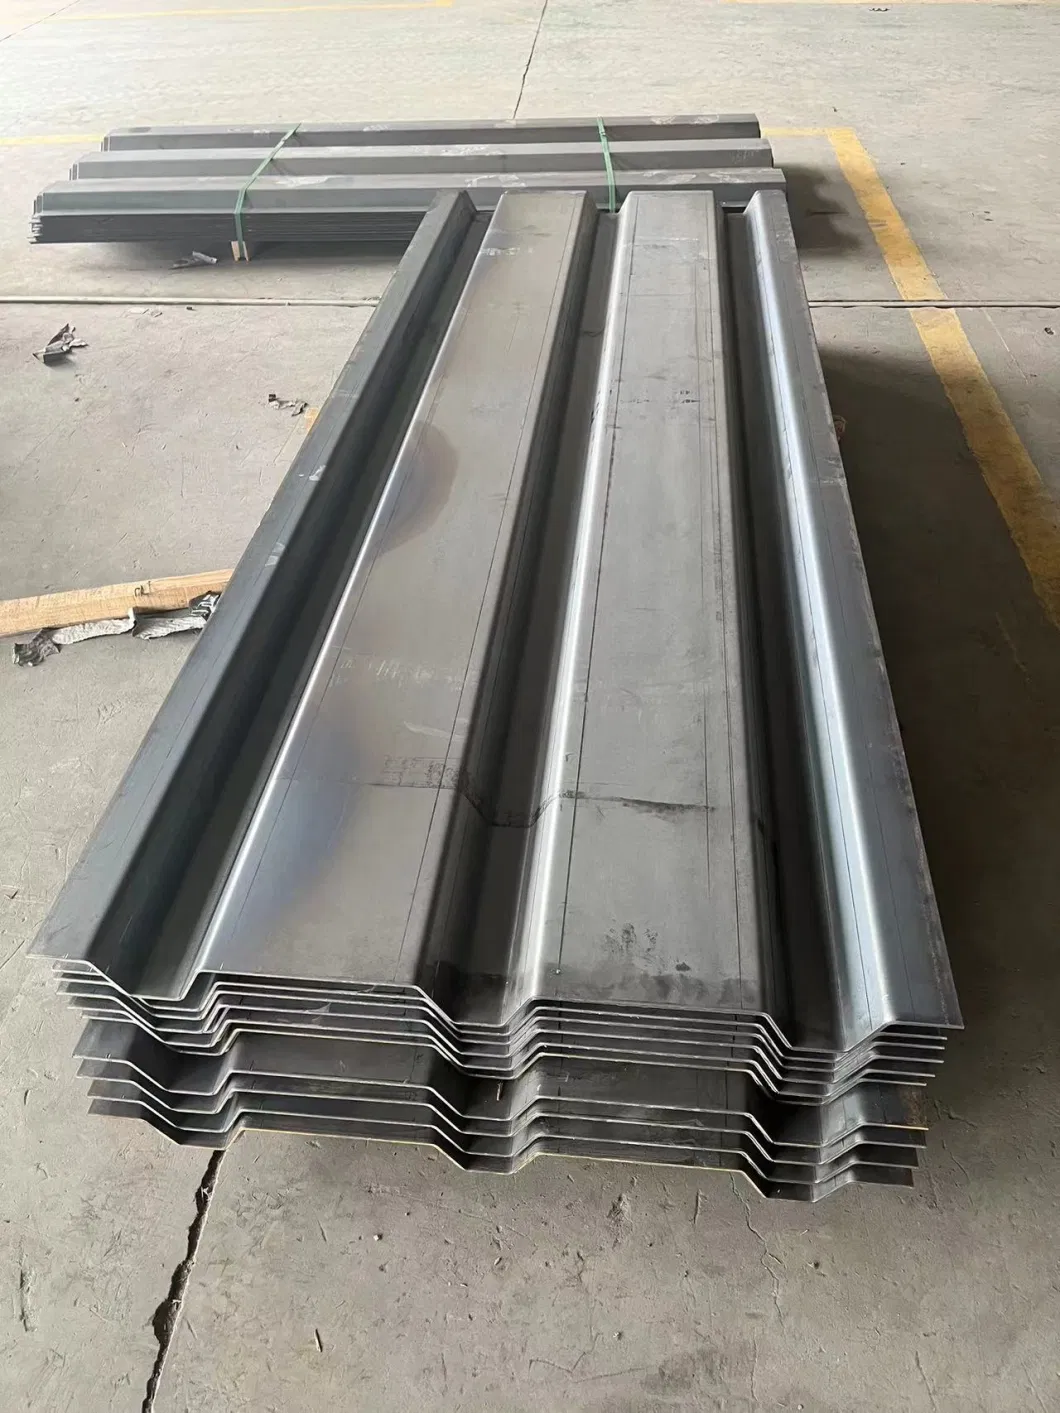 ASTM A204m Gr. B Hot Rolled Steel Plate Manufacturer 1inch Thick CNC Cutting ASME SA240m A285m Gr. B Container Molybdenum Alloy Steel Plates for Pressure Vessel